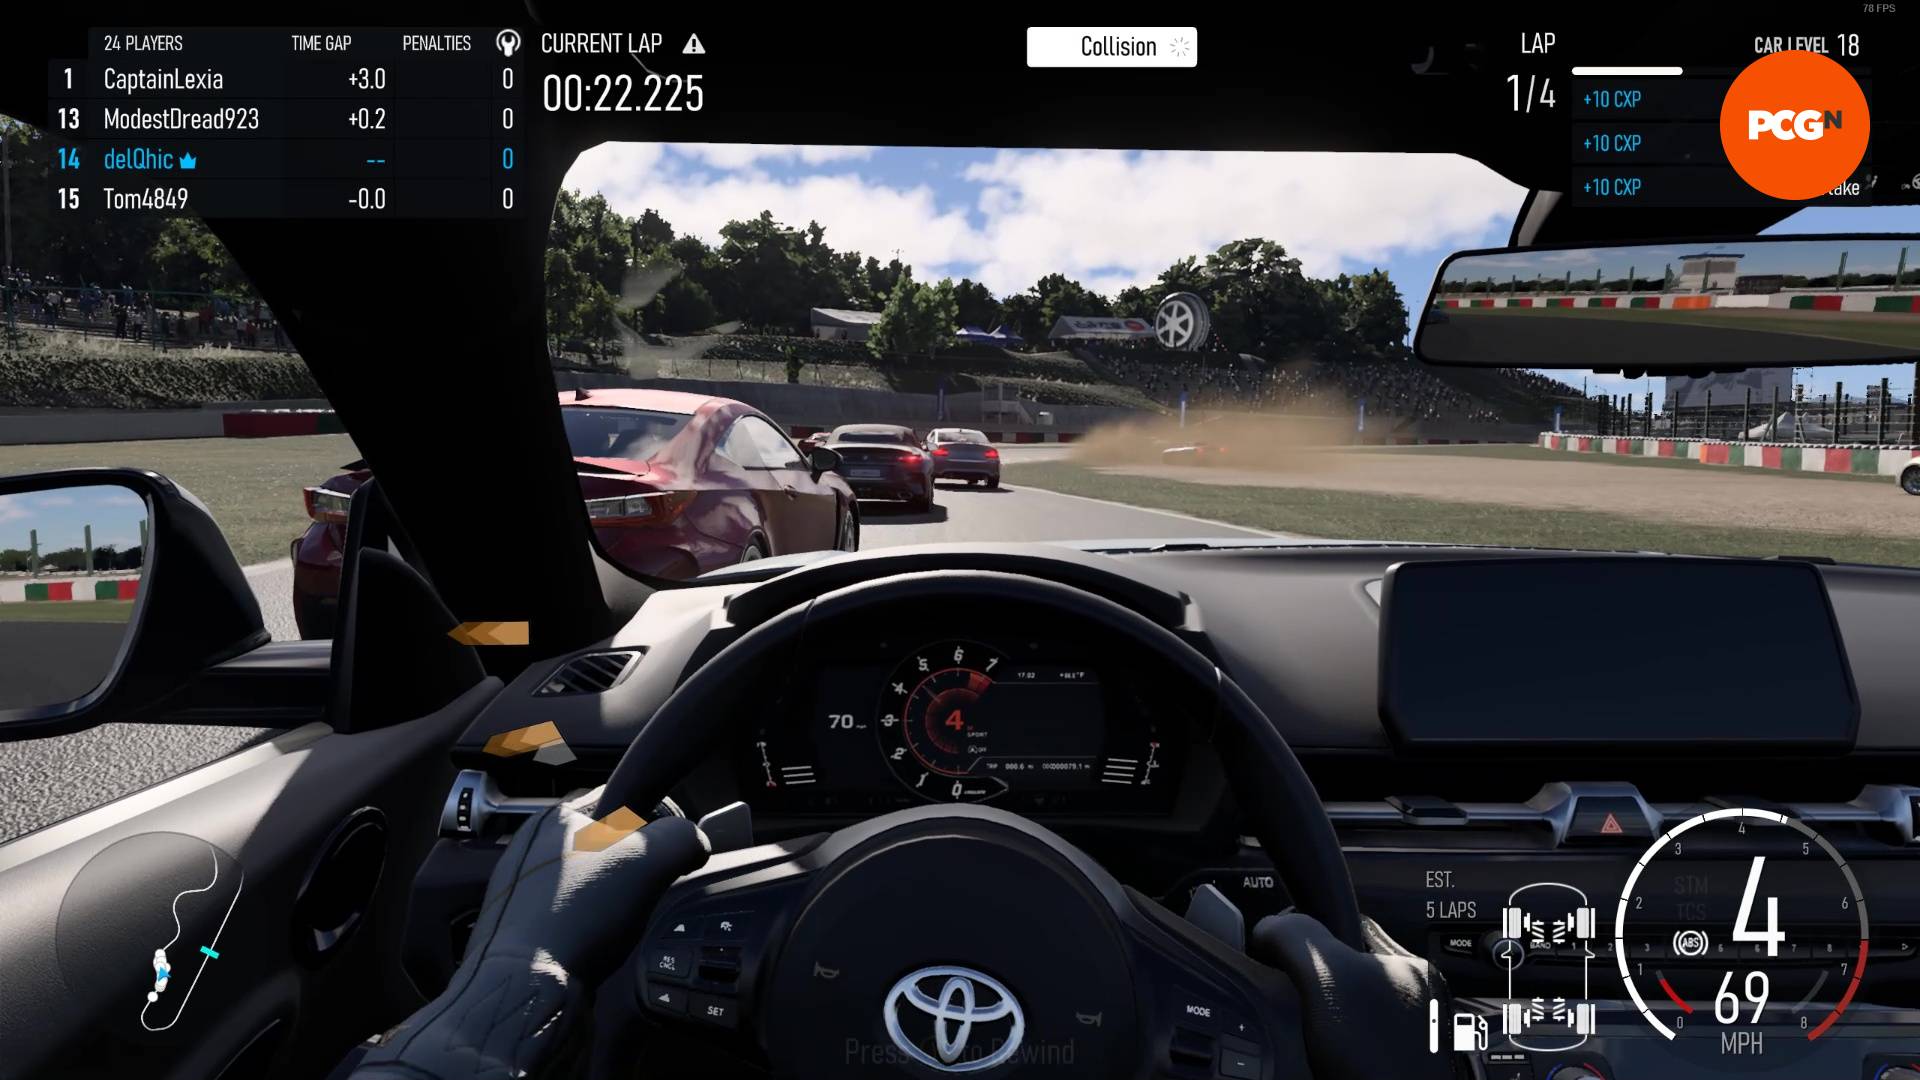 Forza Horizon review: Driving behind the wheel against the AI, where the AI has gone off-track into the sand trap round Suzuka in Japan.